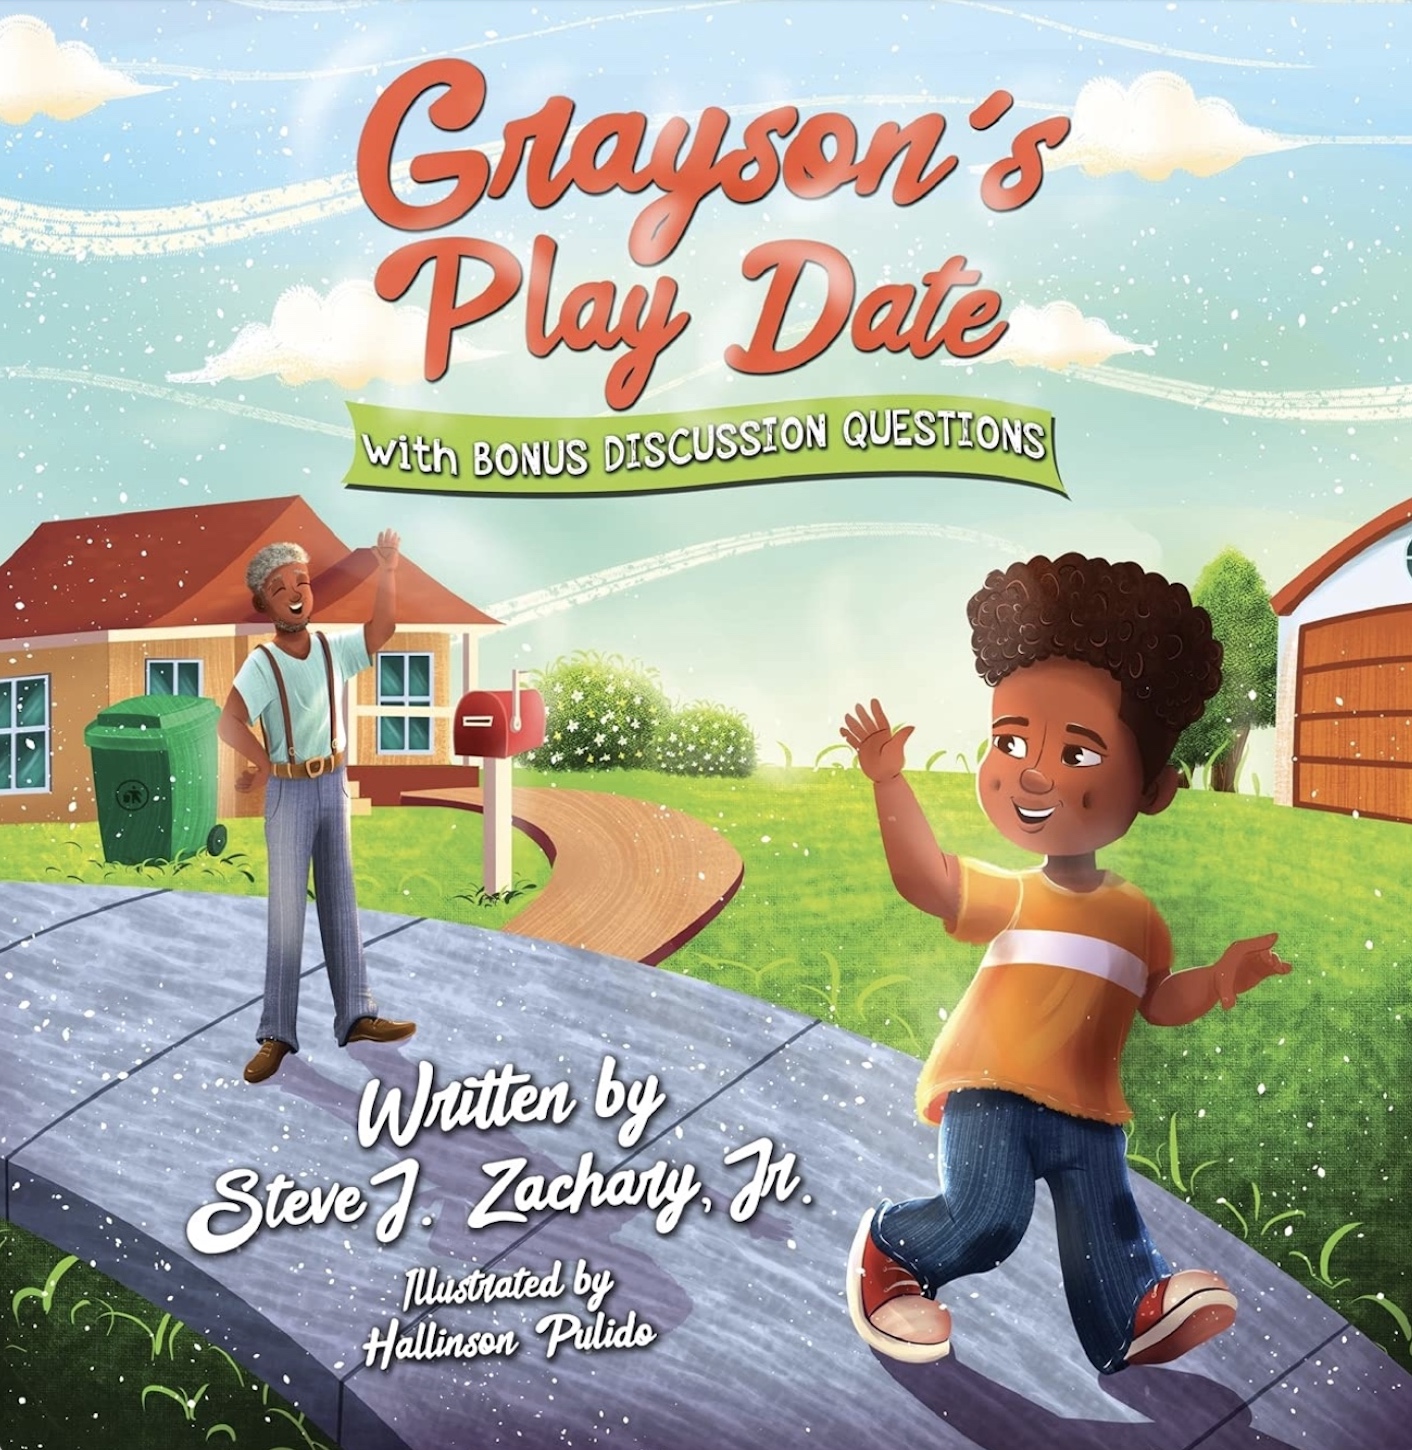 Cover of the children's book, "Grayson's Play Date" by Steve J. Zachary Jr.